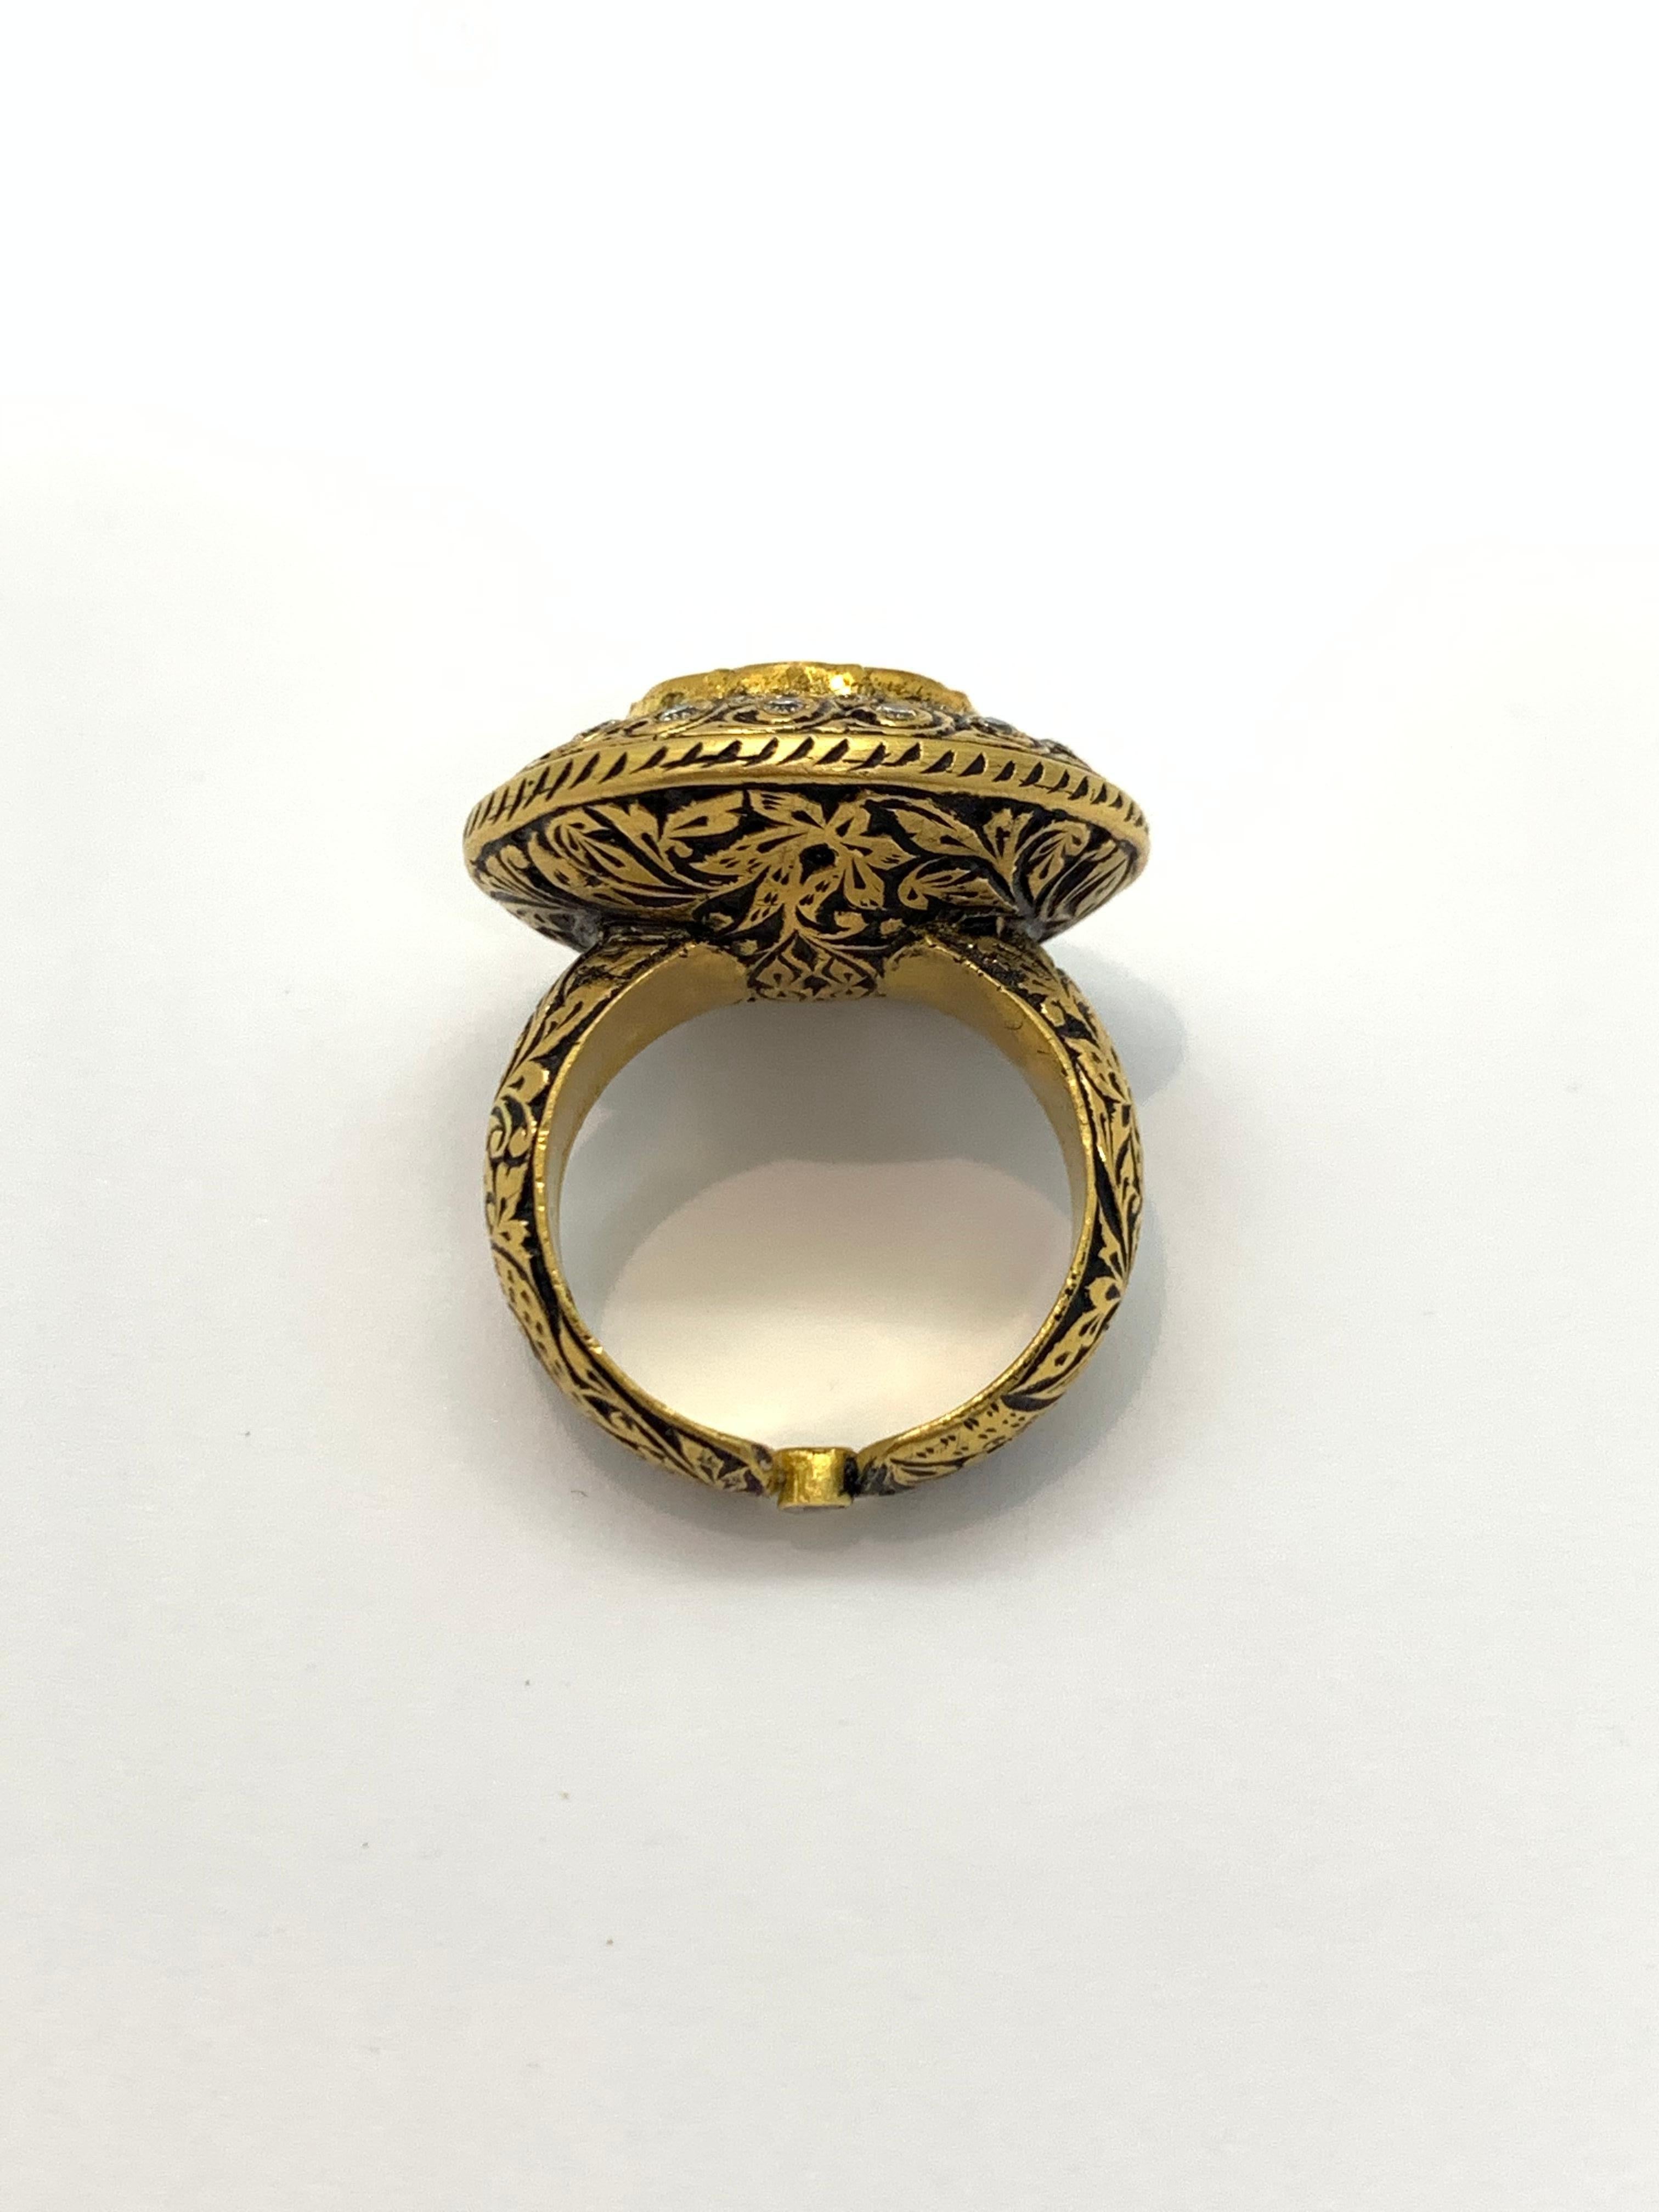 A beautiful cocktail ring with a big uncut diamond centre, and enamel Work all around the ring. 
The uncut diamond is called “polki”, these diamonds have been used in Indian and Mughal Jewelery for centuries.The art of setting the stones is similar